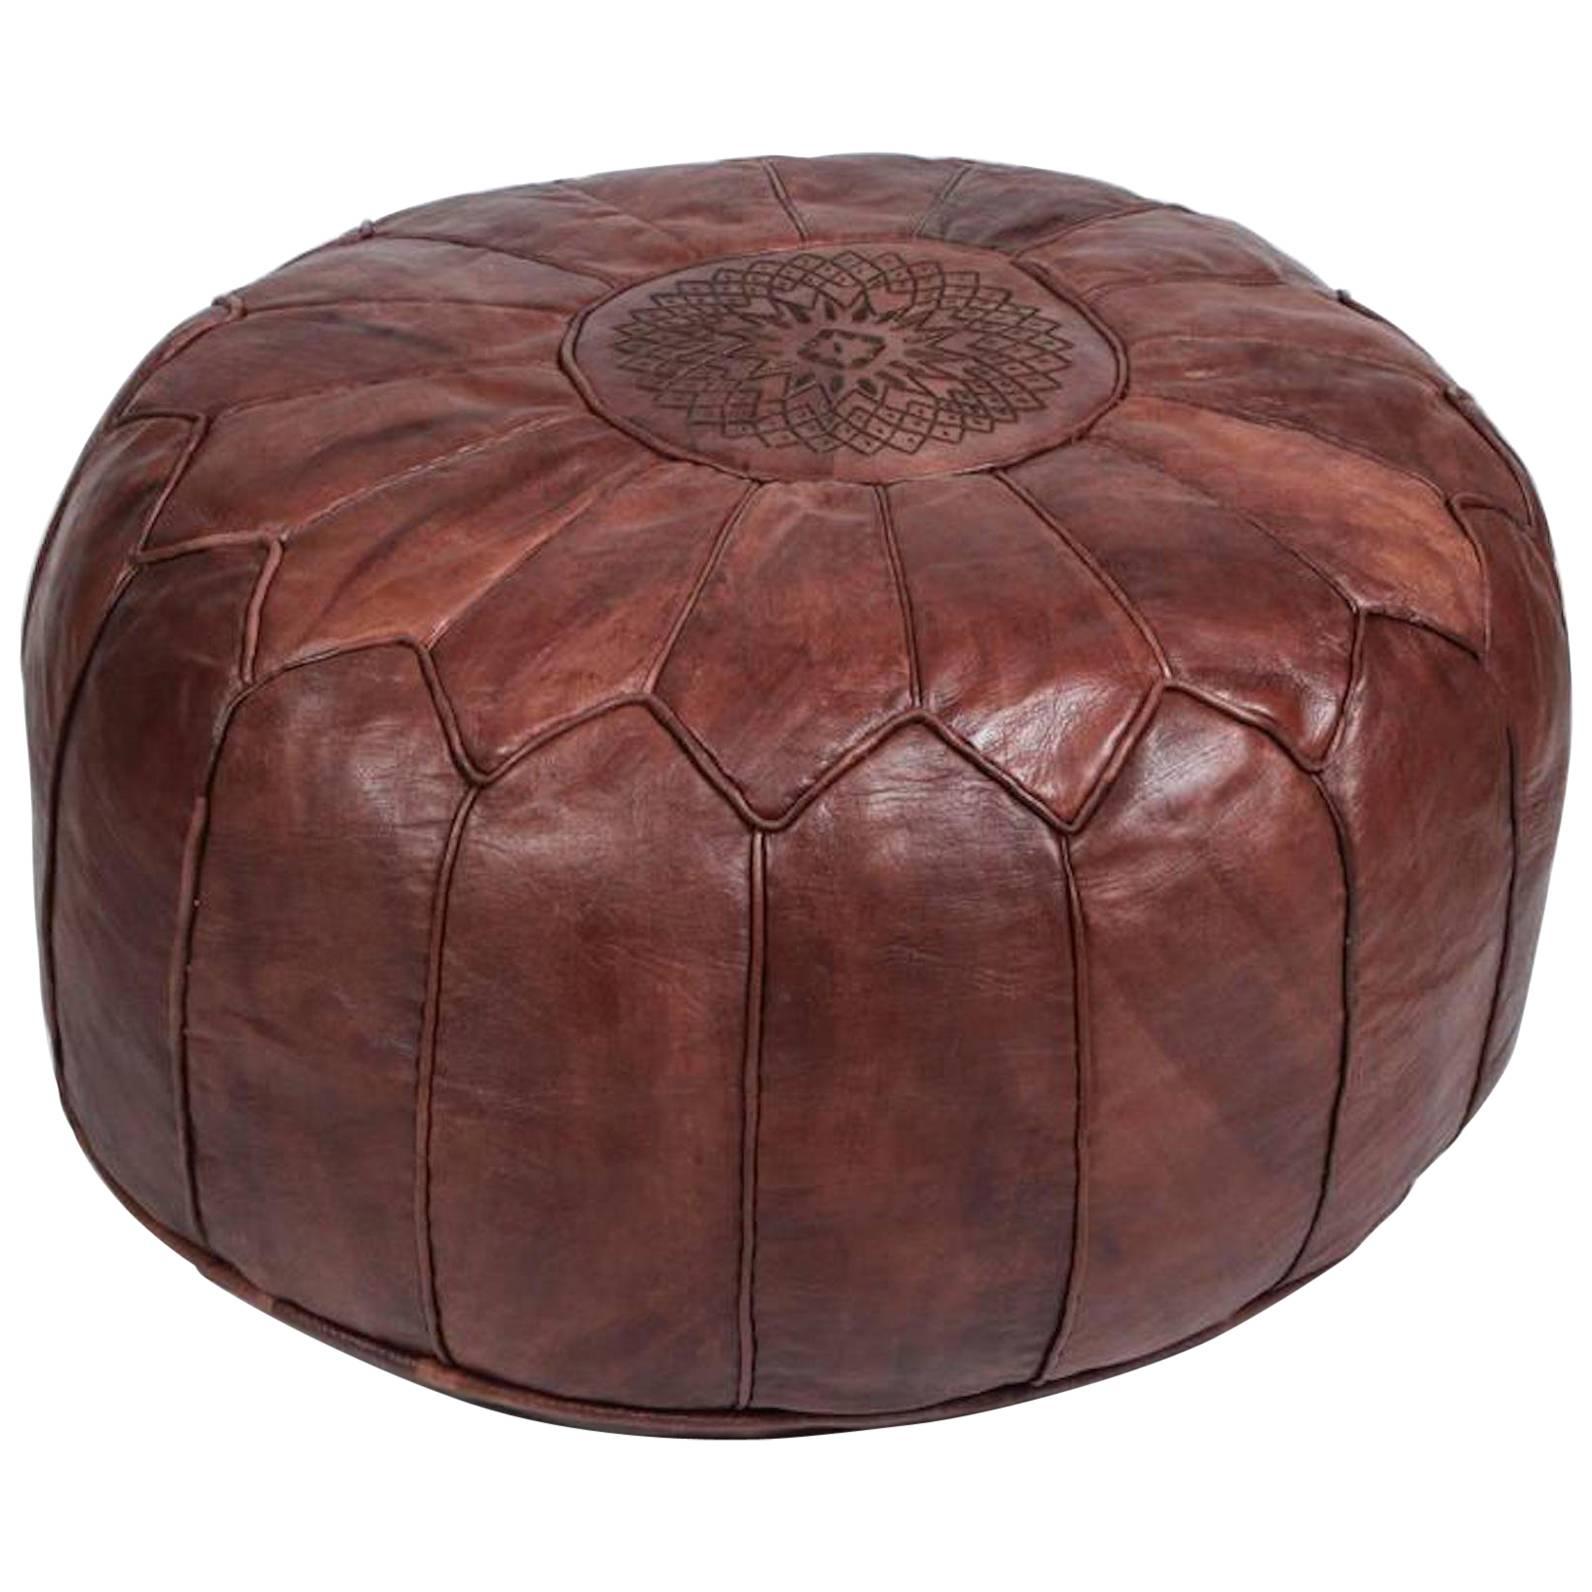 Vintage Moroccan Leather Pouf in Chocolate Brown Hand Tooled In Marrakech